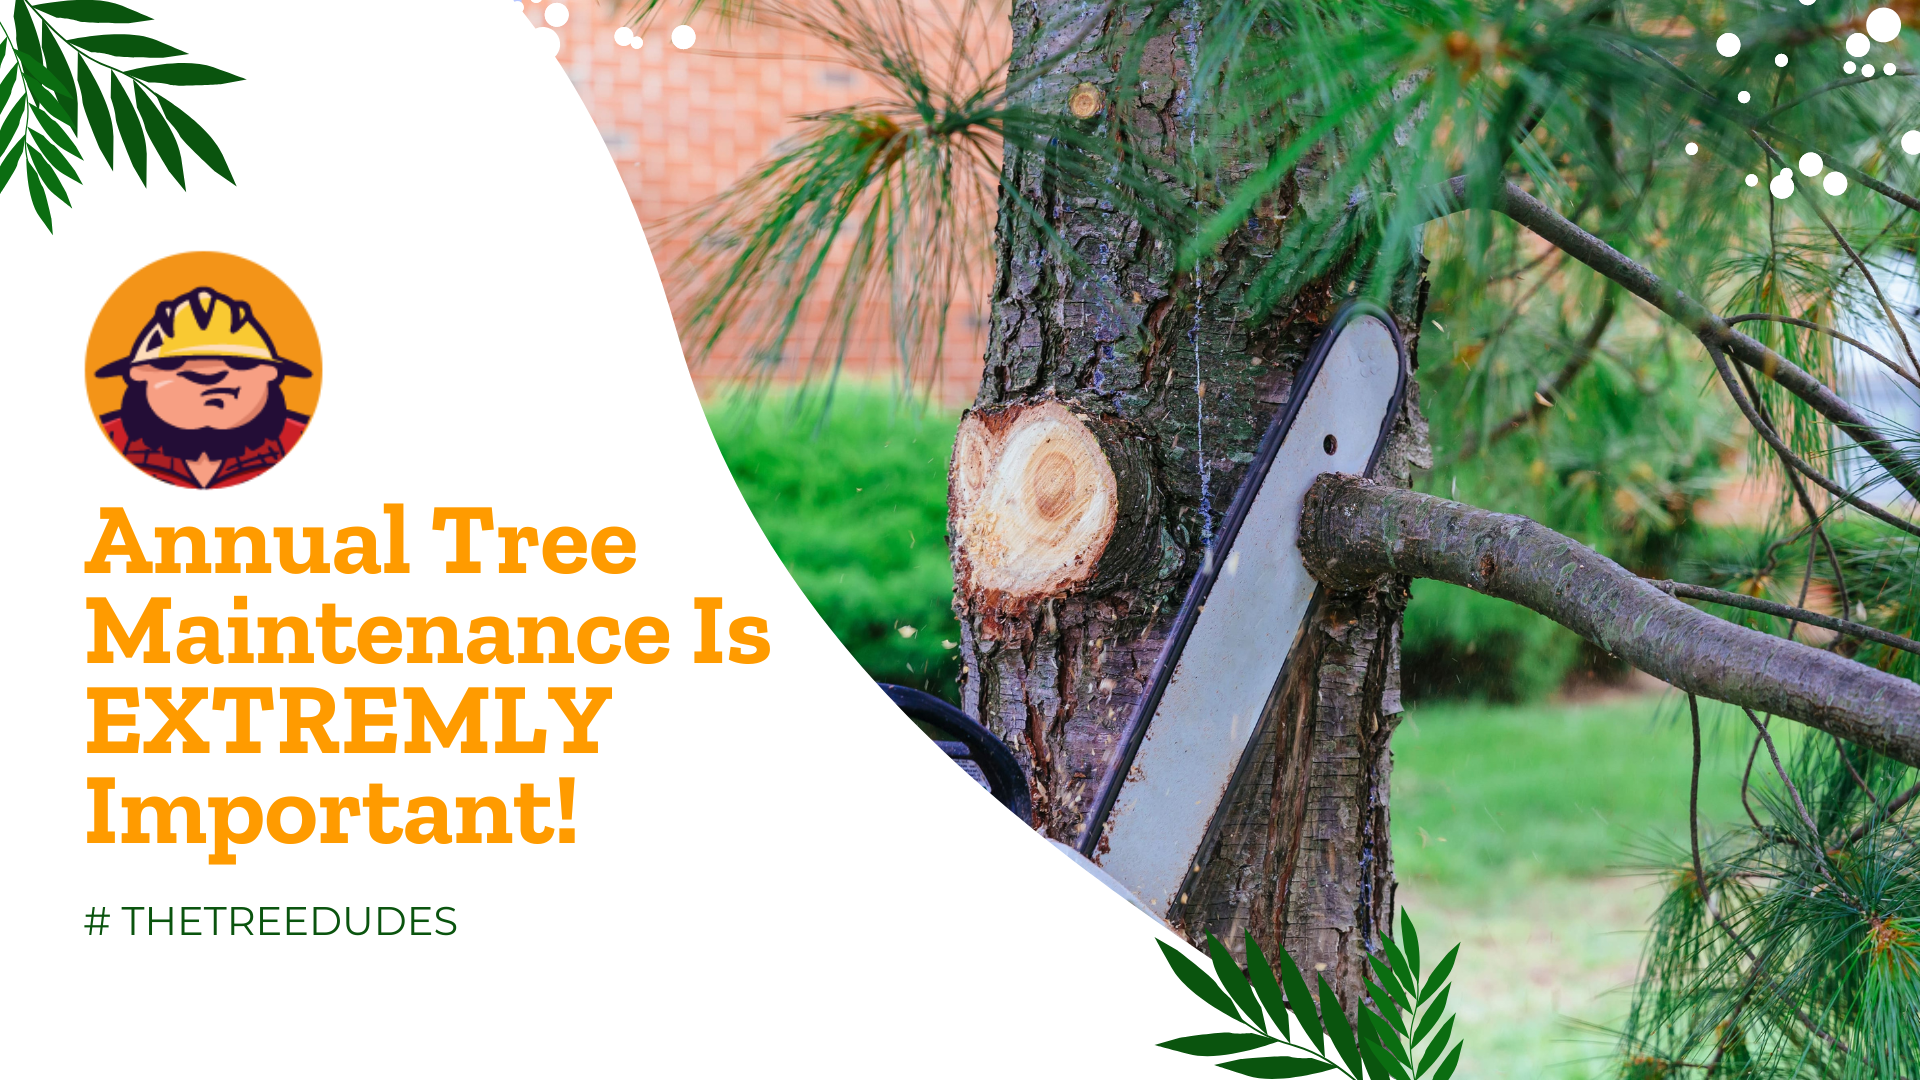 Annual Tree Maintenance is EXTREMLY Important!